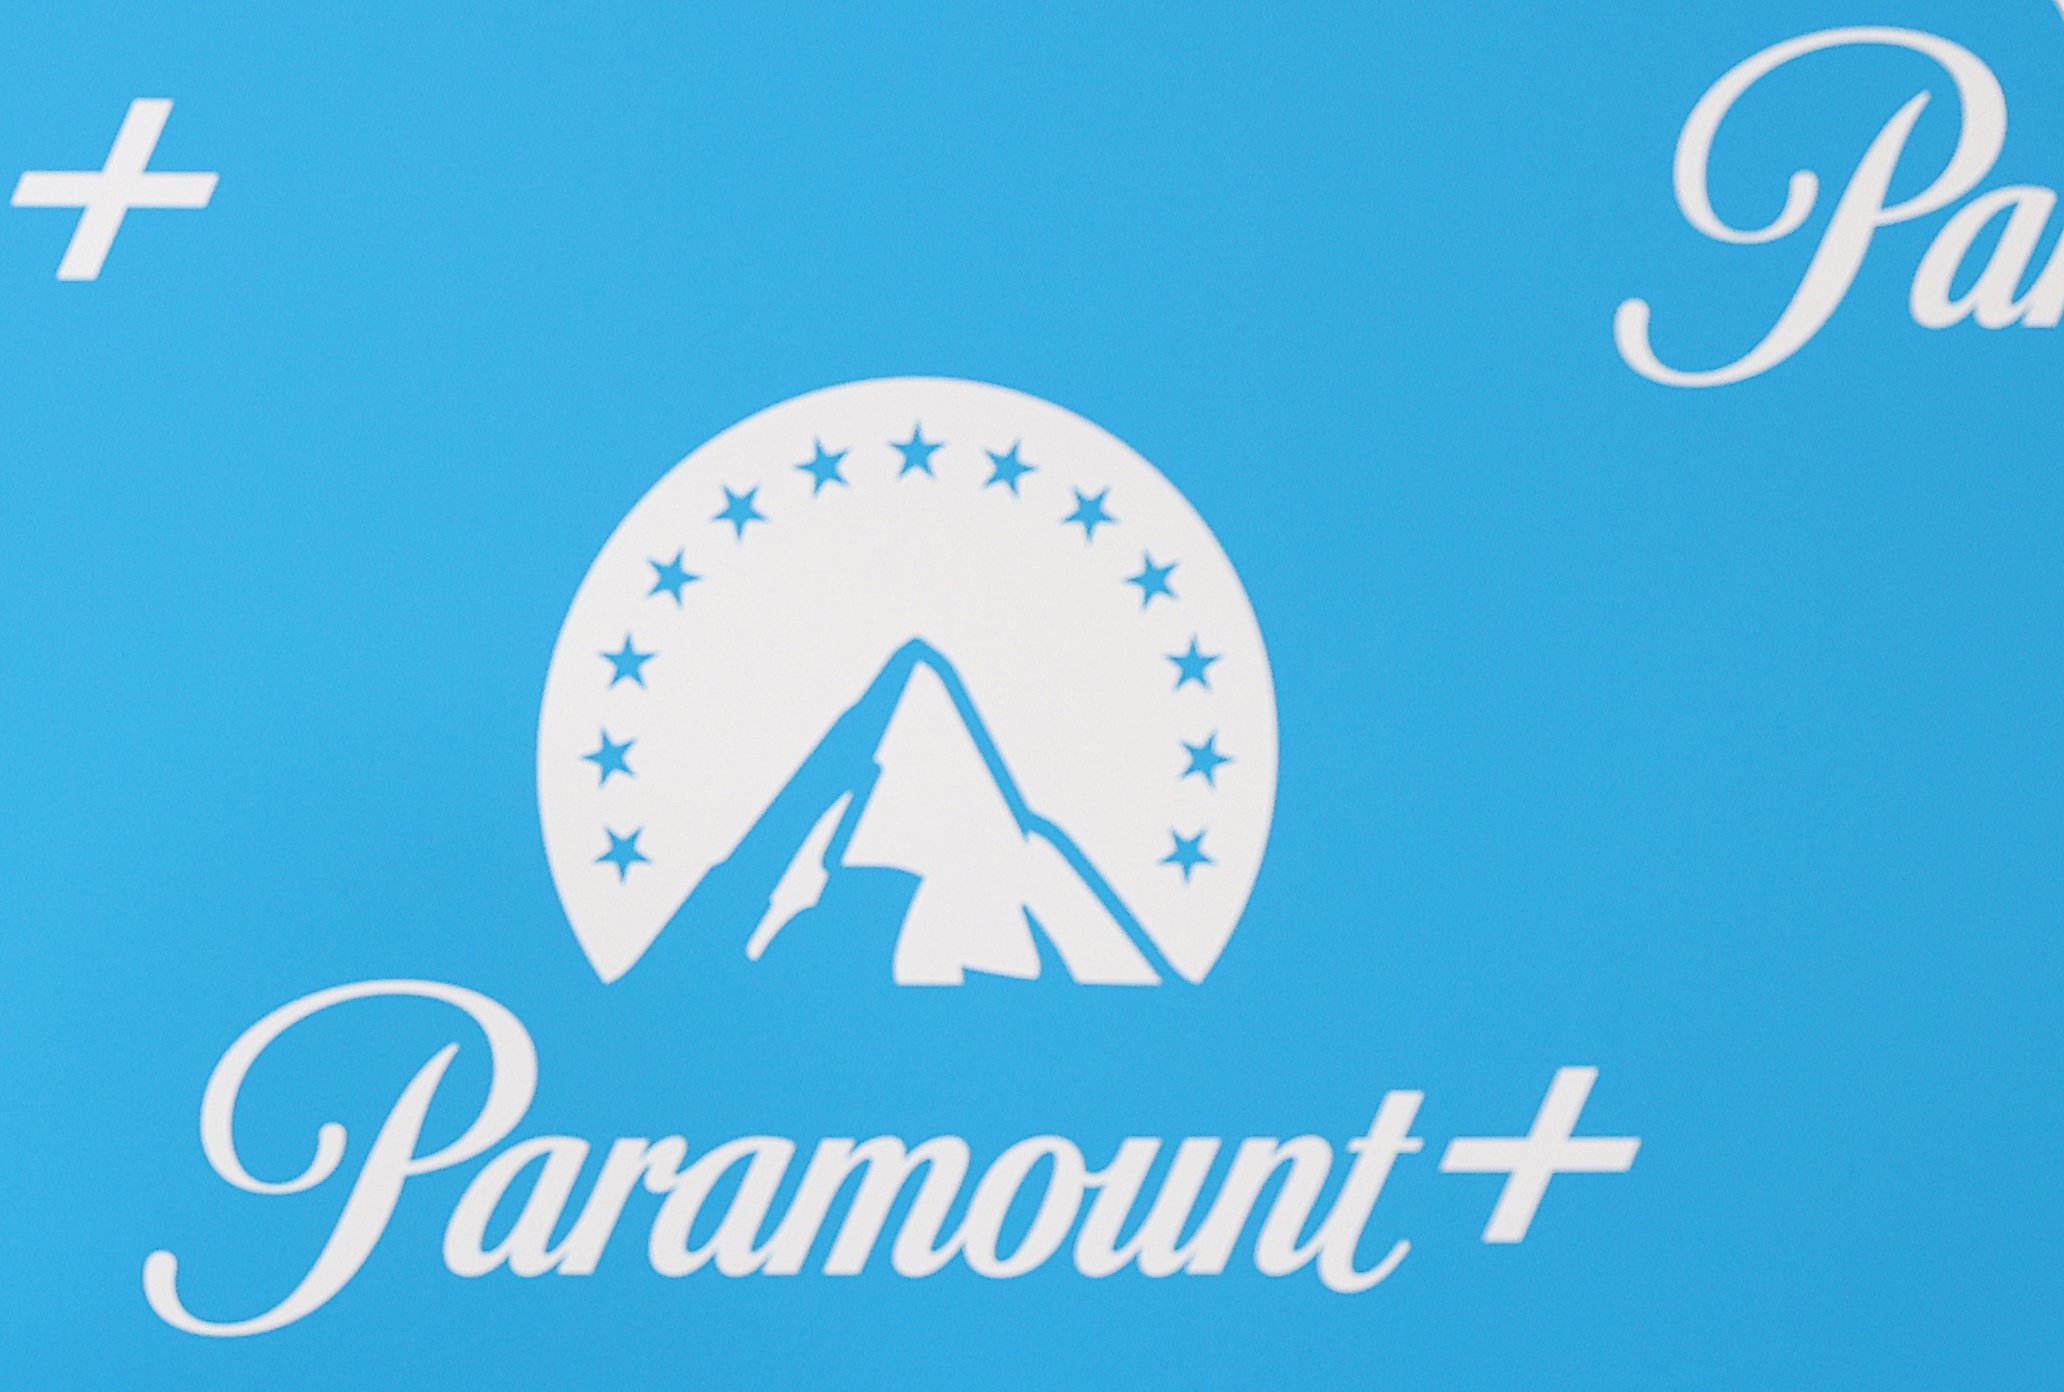 The logo of the streaming service Paramount+ on a logo wall at the Paramount+ launch event